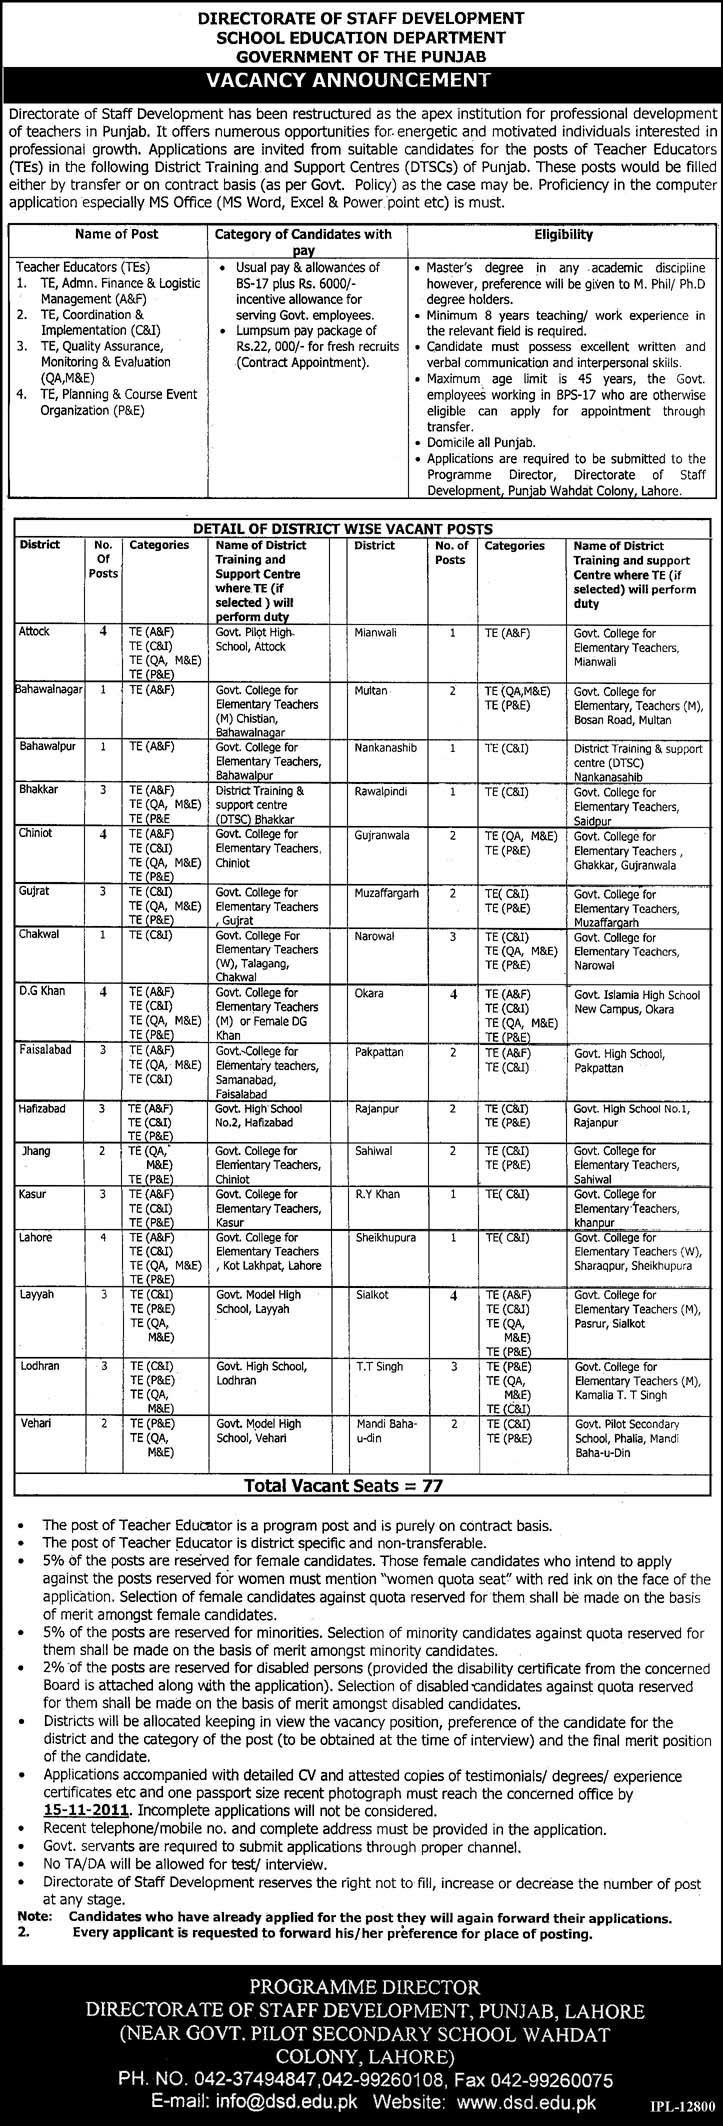 Directorate of Staff Development School Education Department Government of the Punjab Jobs Opportunity